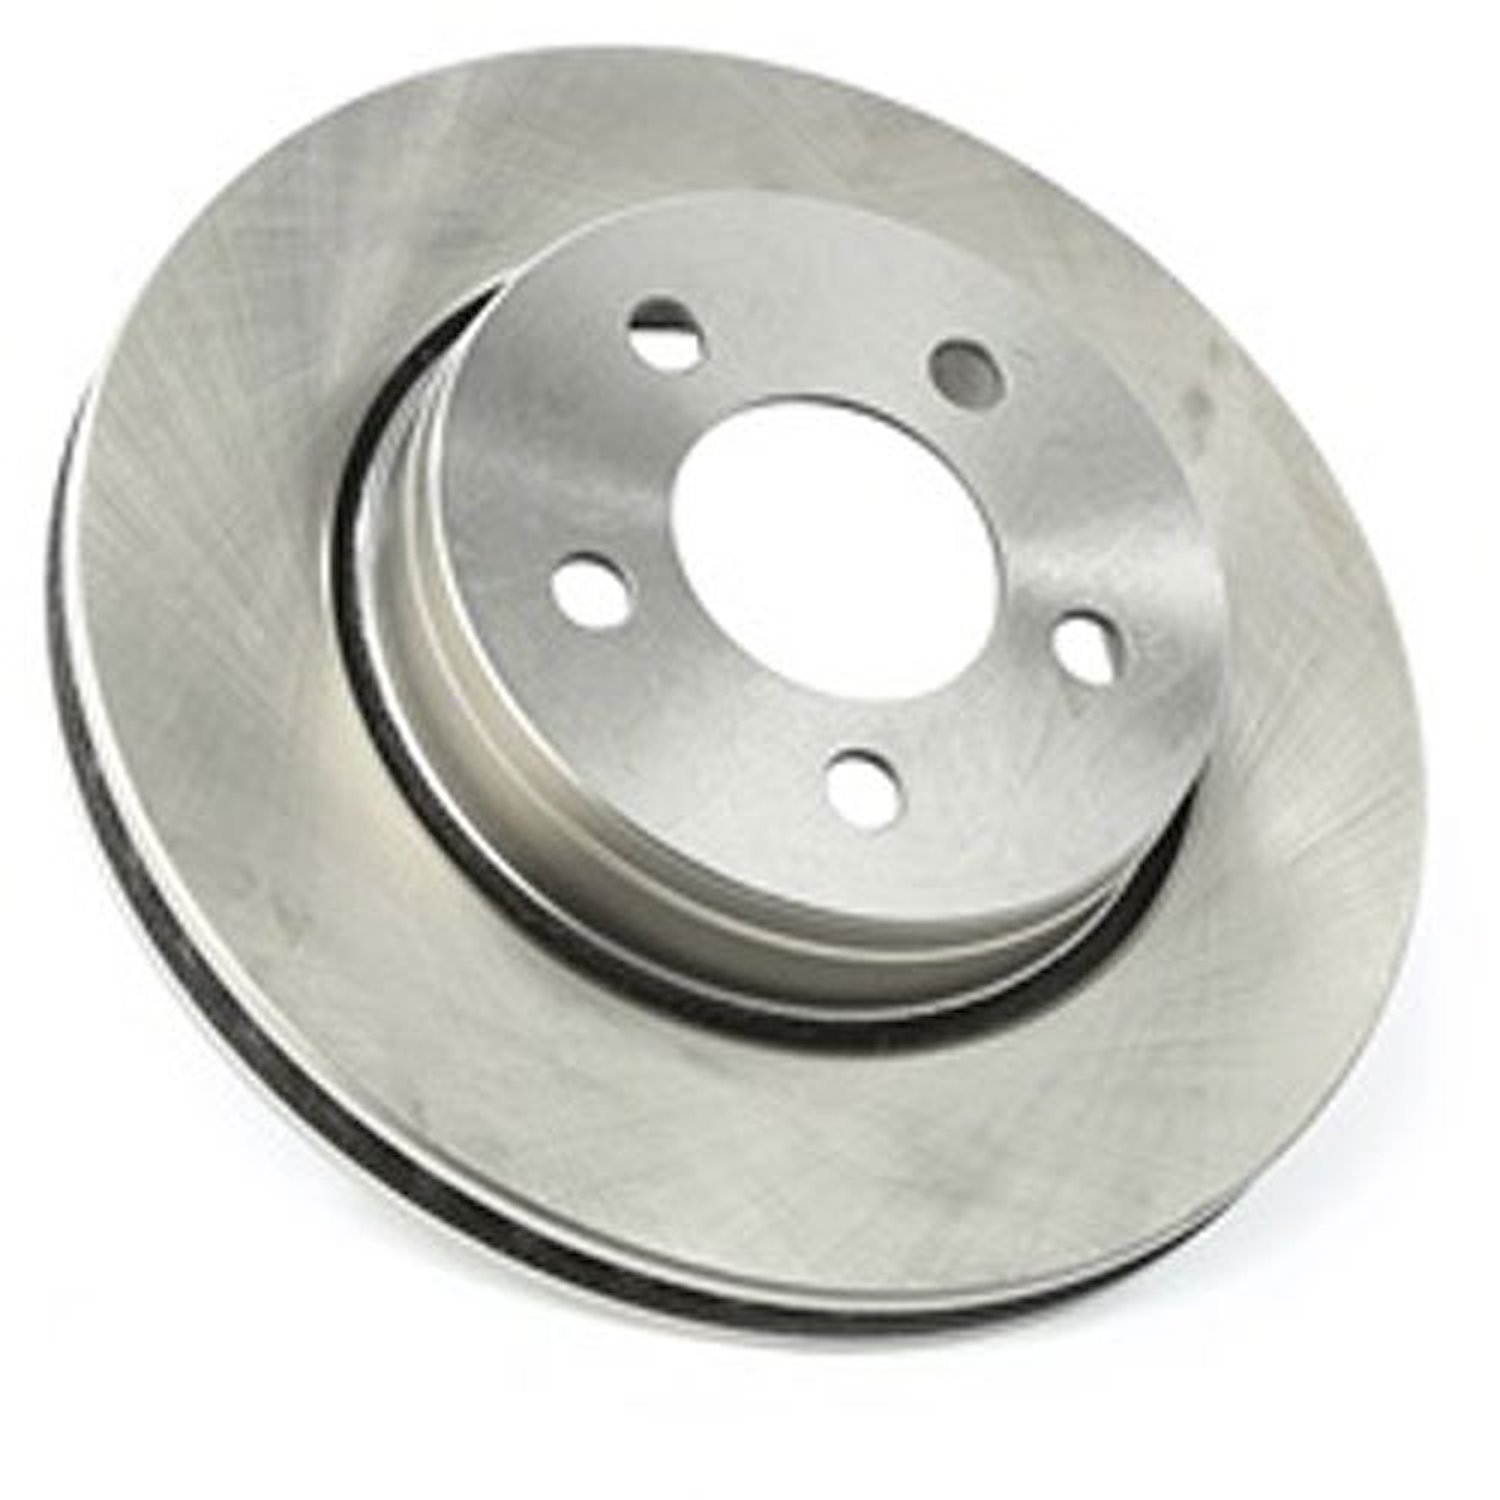 Replacement front disc brake rotor from Omix-ADA, Fits 08-12 Jeep Libertys. Right or Left side.